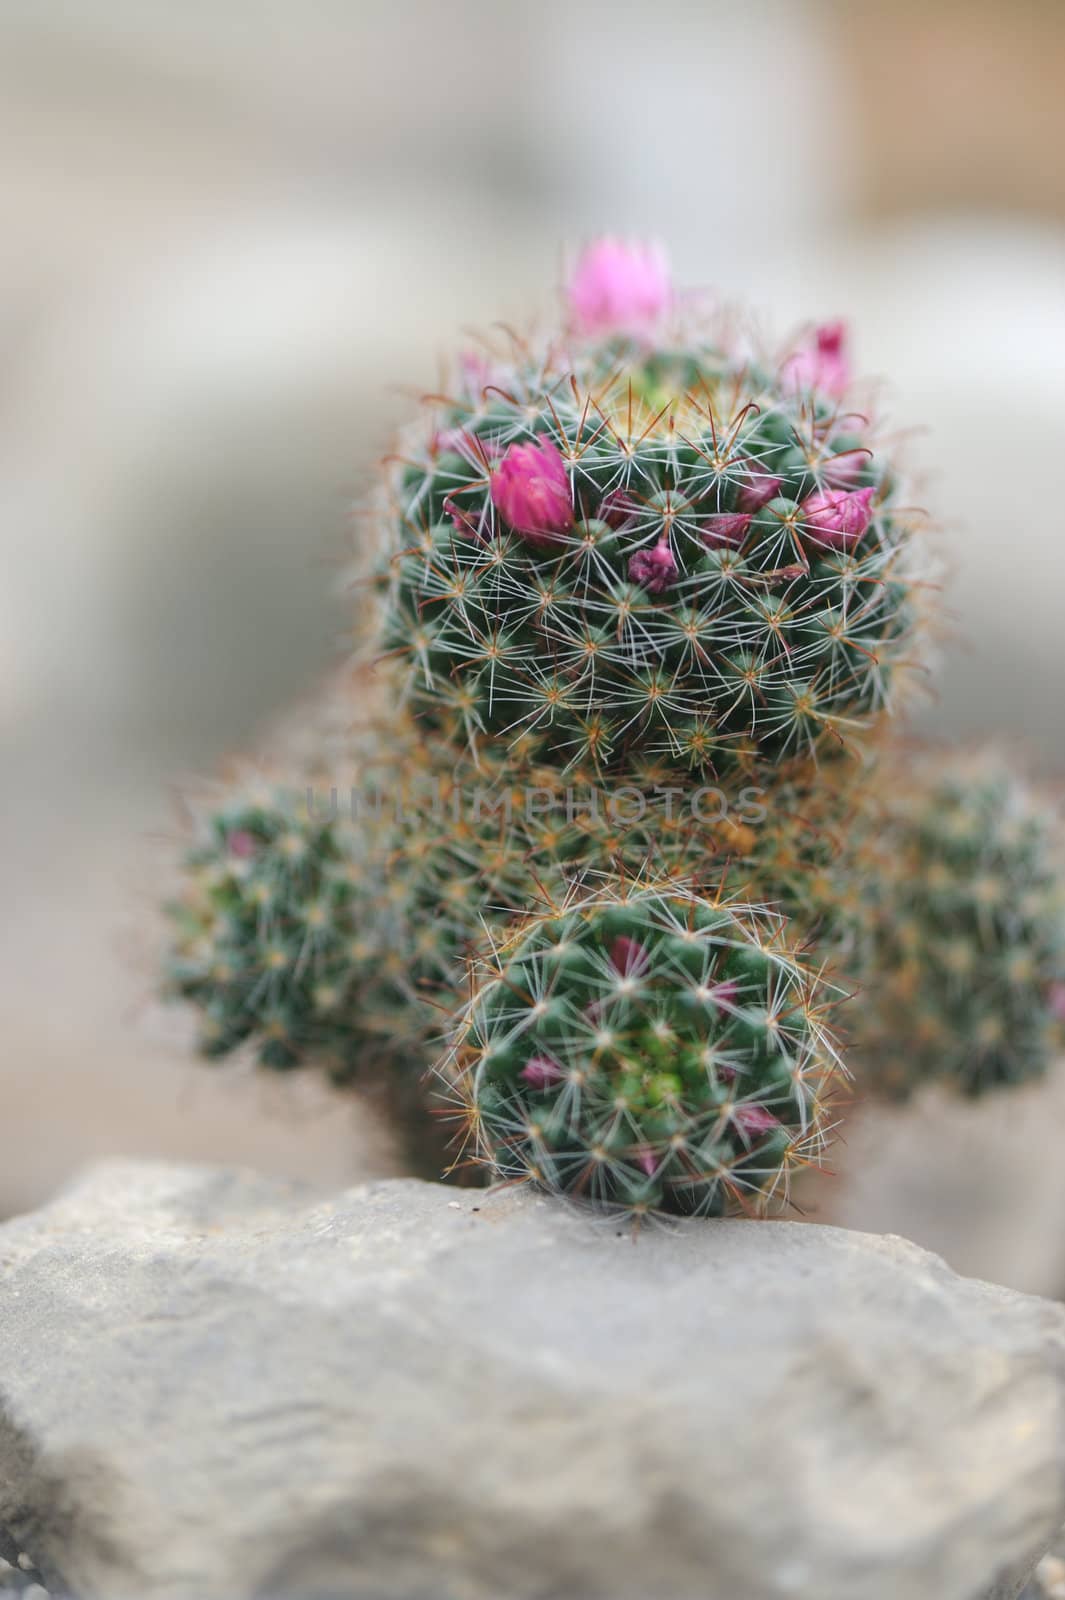 blossoming cactus. type of spiny succulent plant